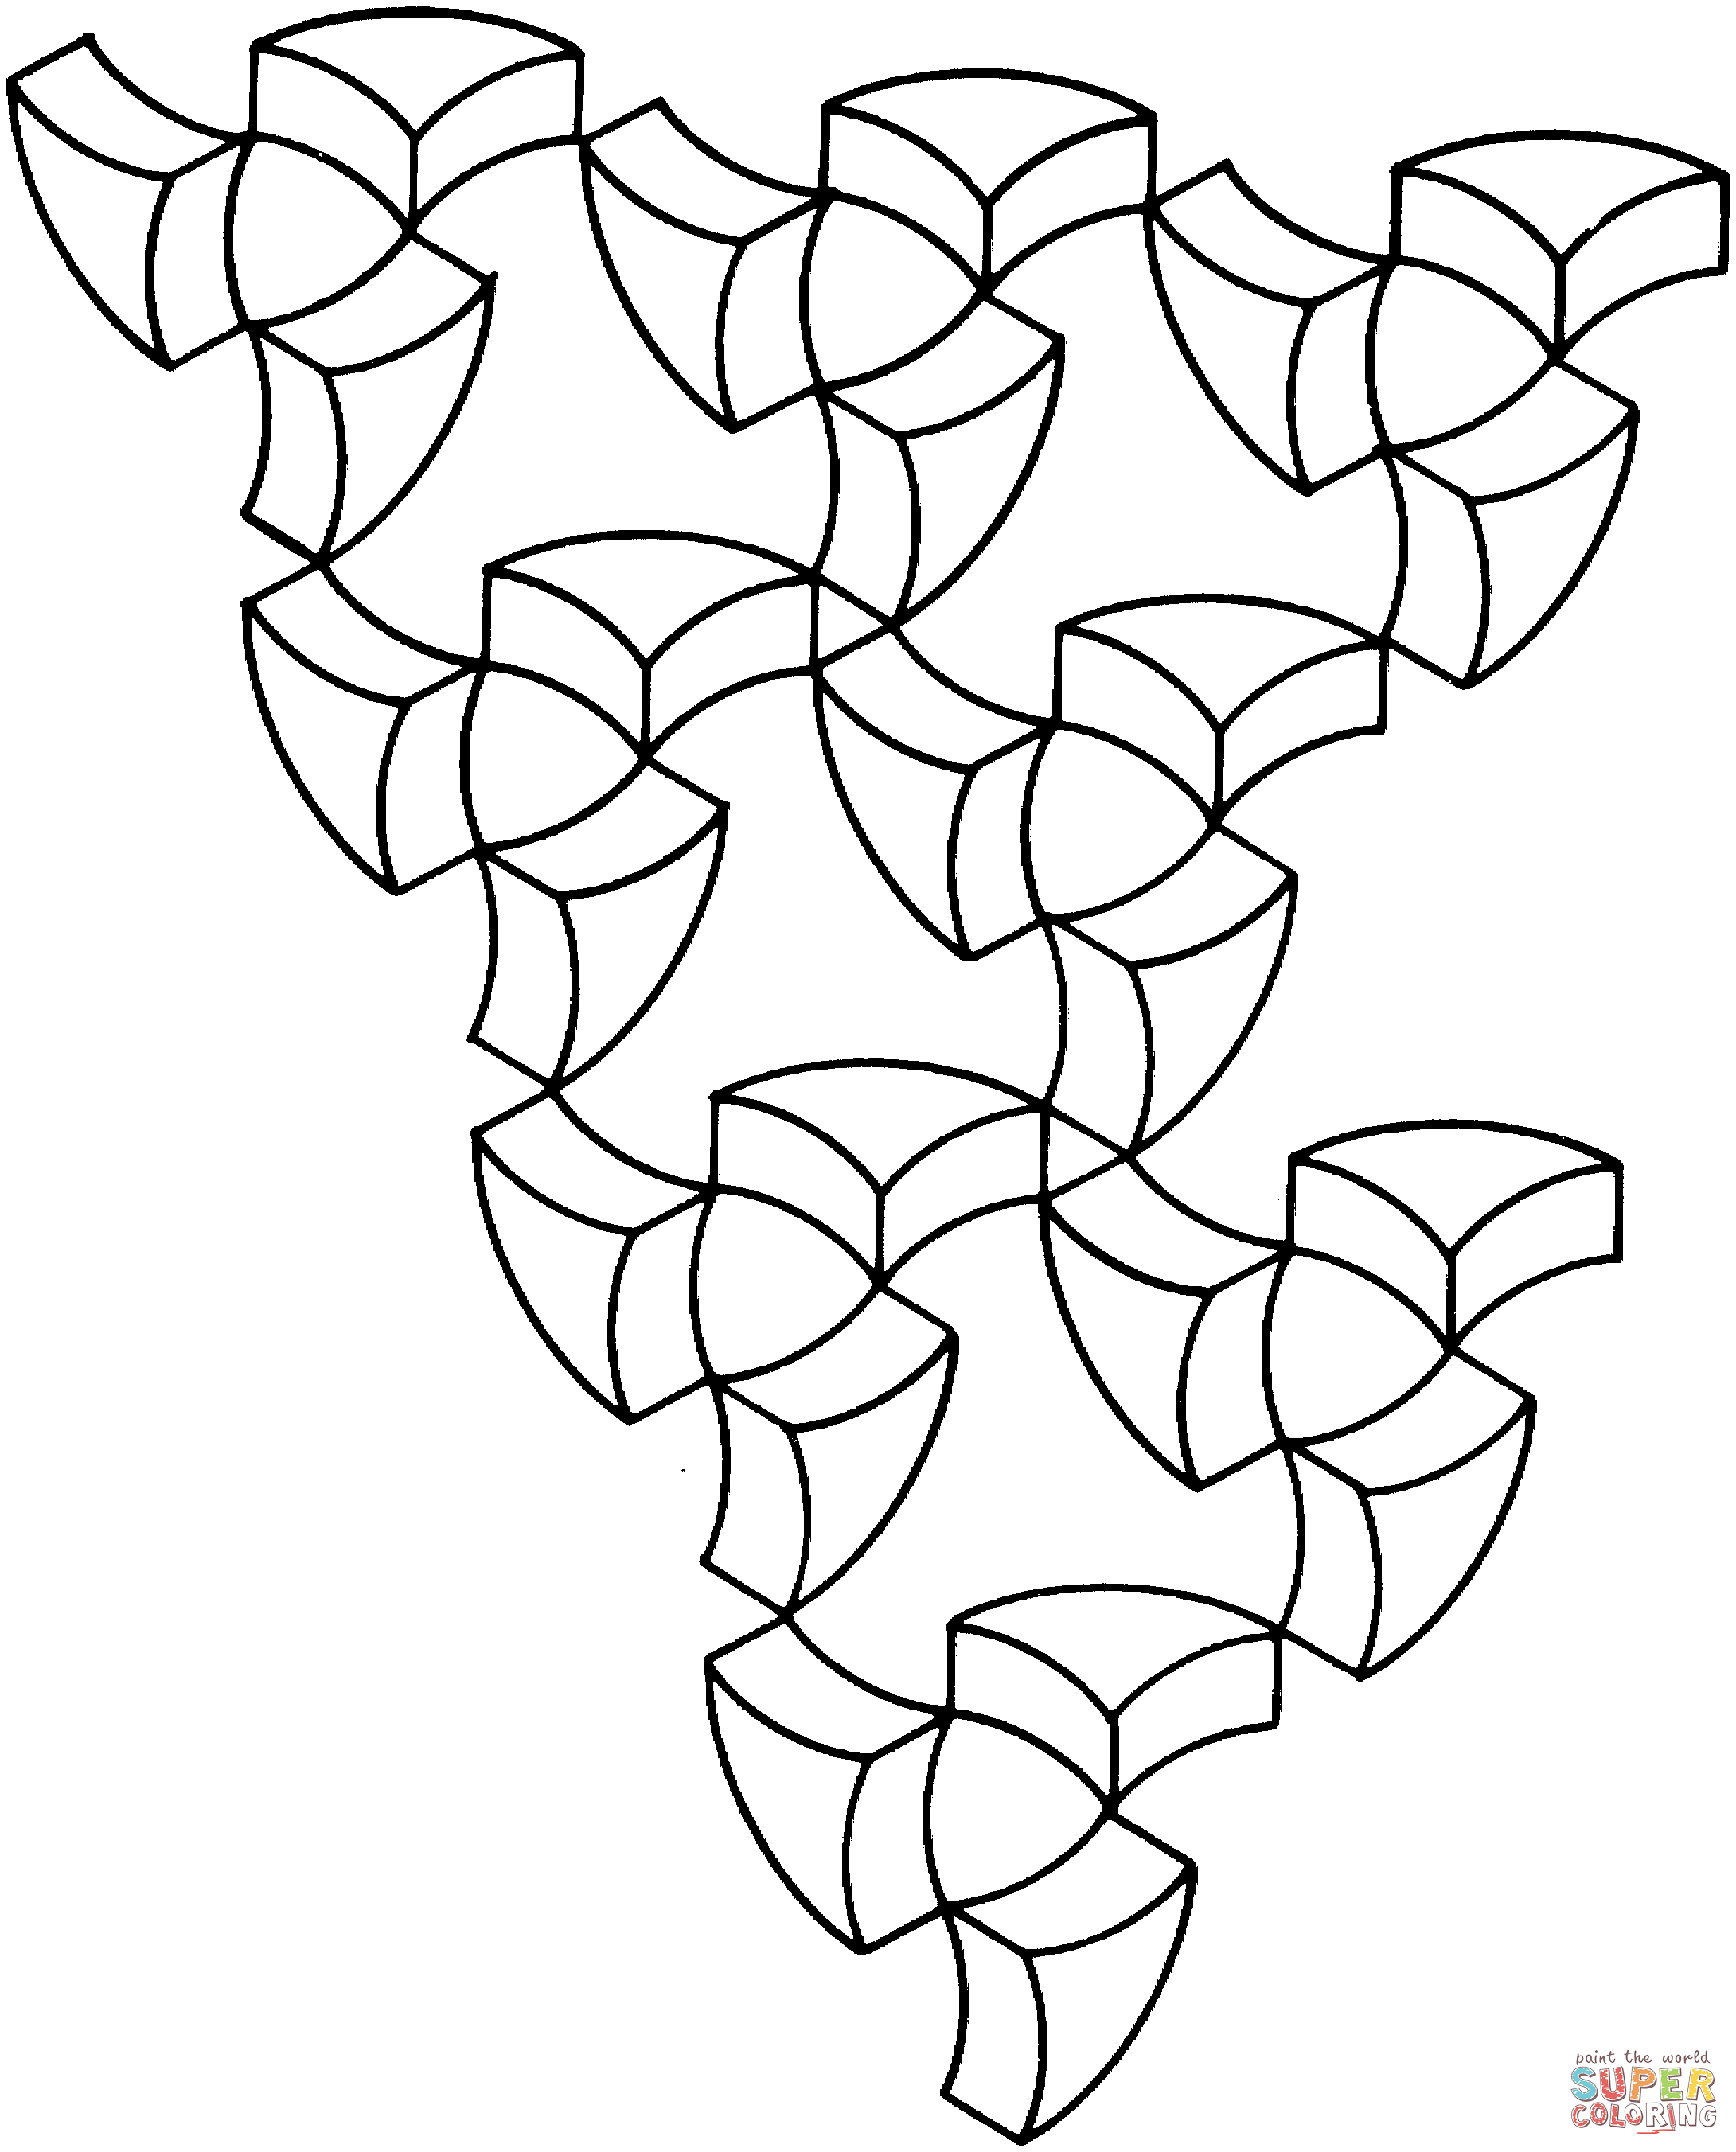 Optical illusions coloring pages | Free Coloring Pages